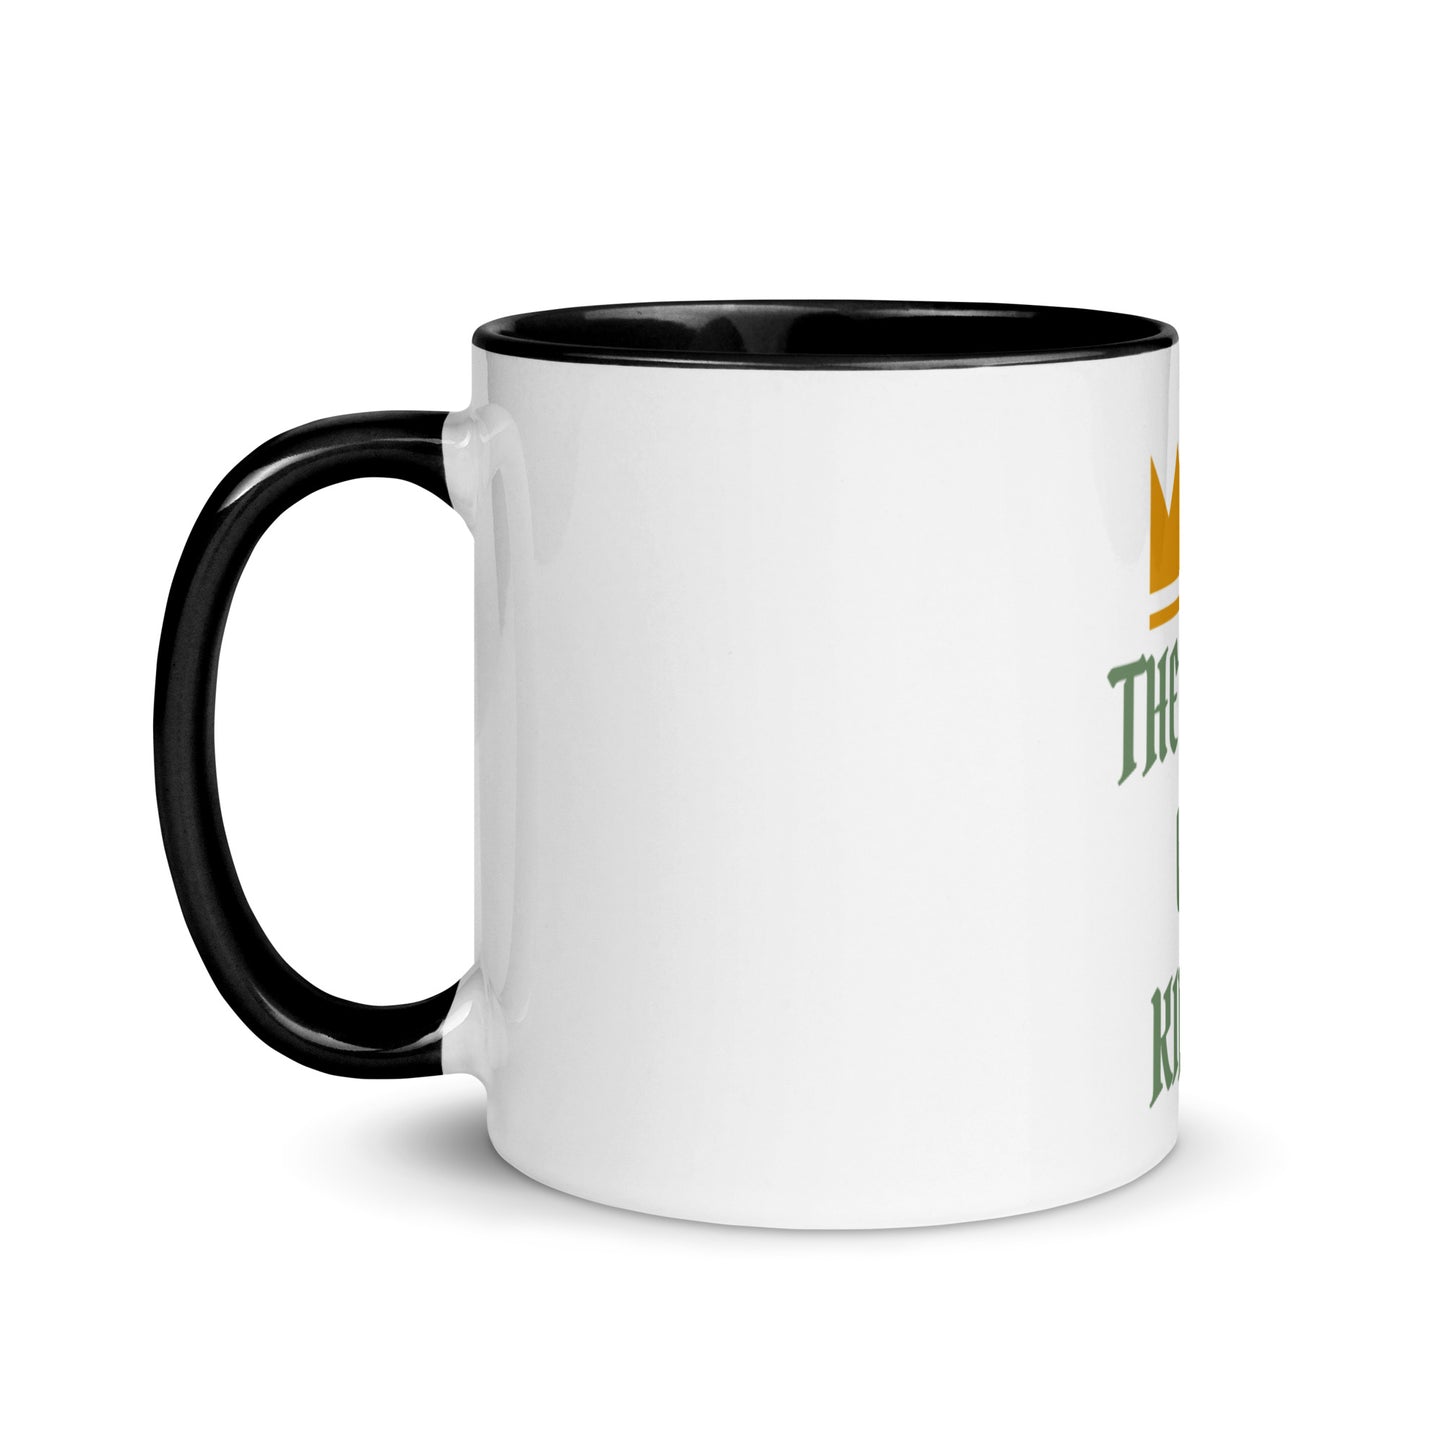 The King of Kings White Ceramic Mug with Color Inside